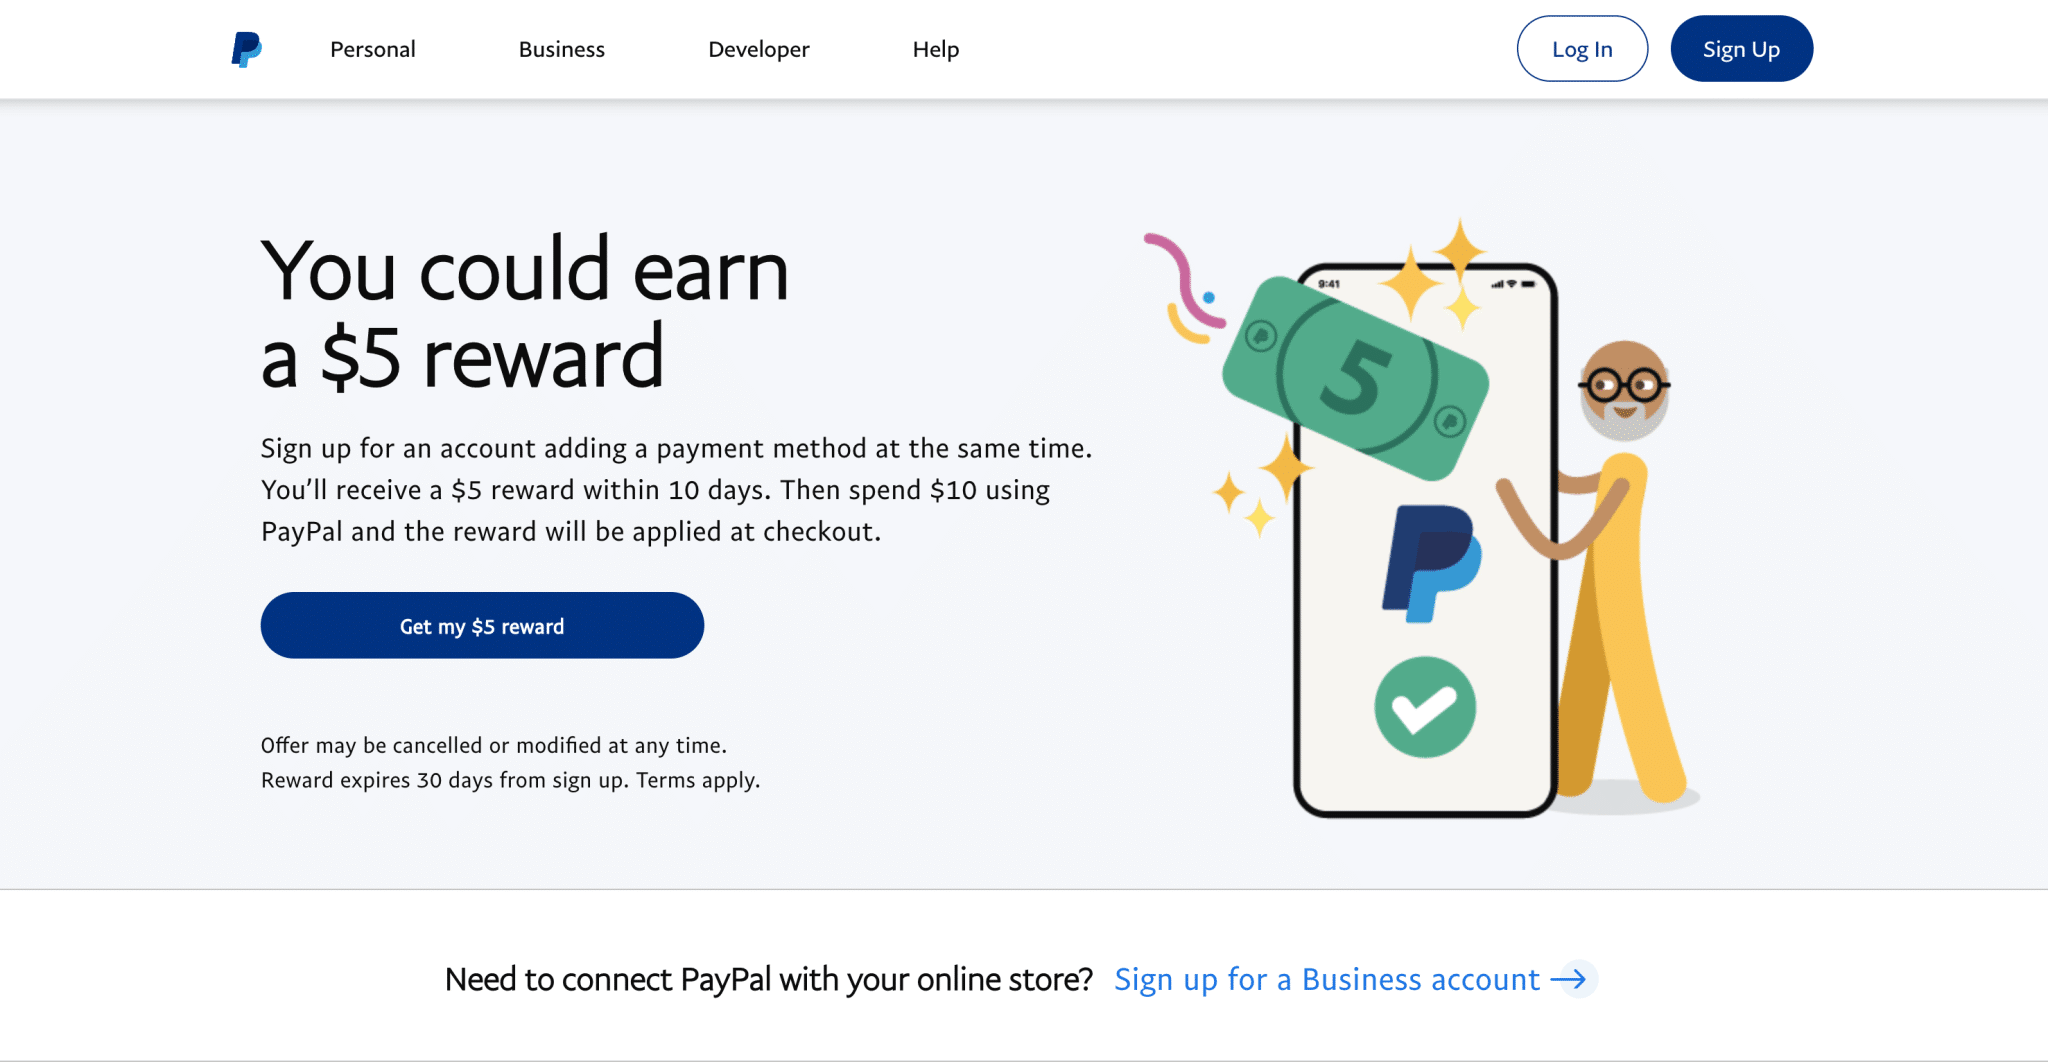 Log In and Sign Up page on PayPal’s website